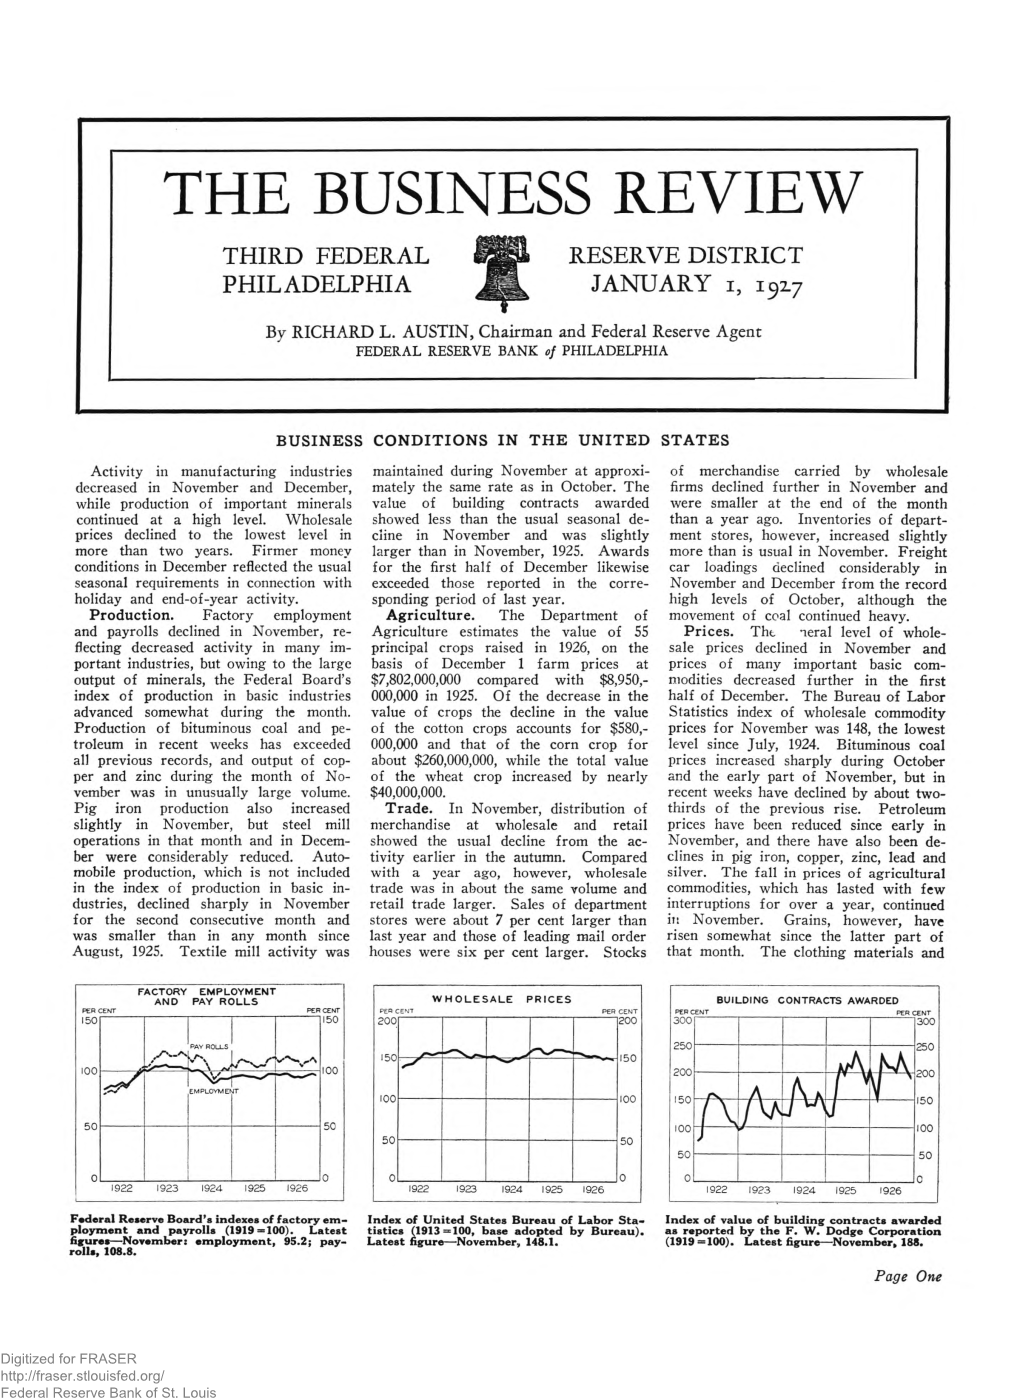 Business Review: January 1, 1927